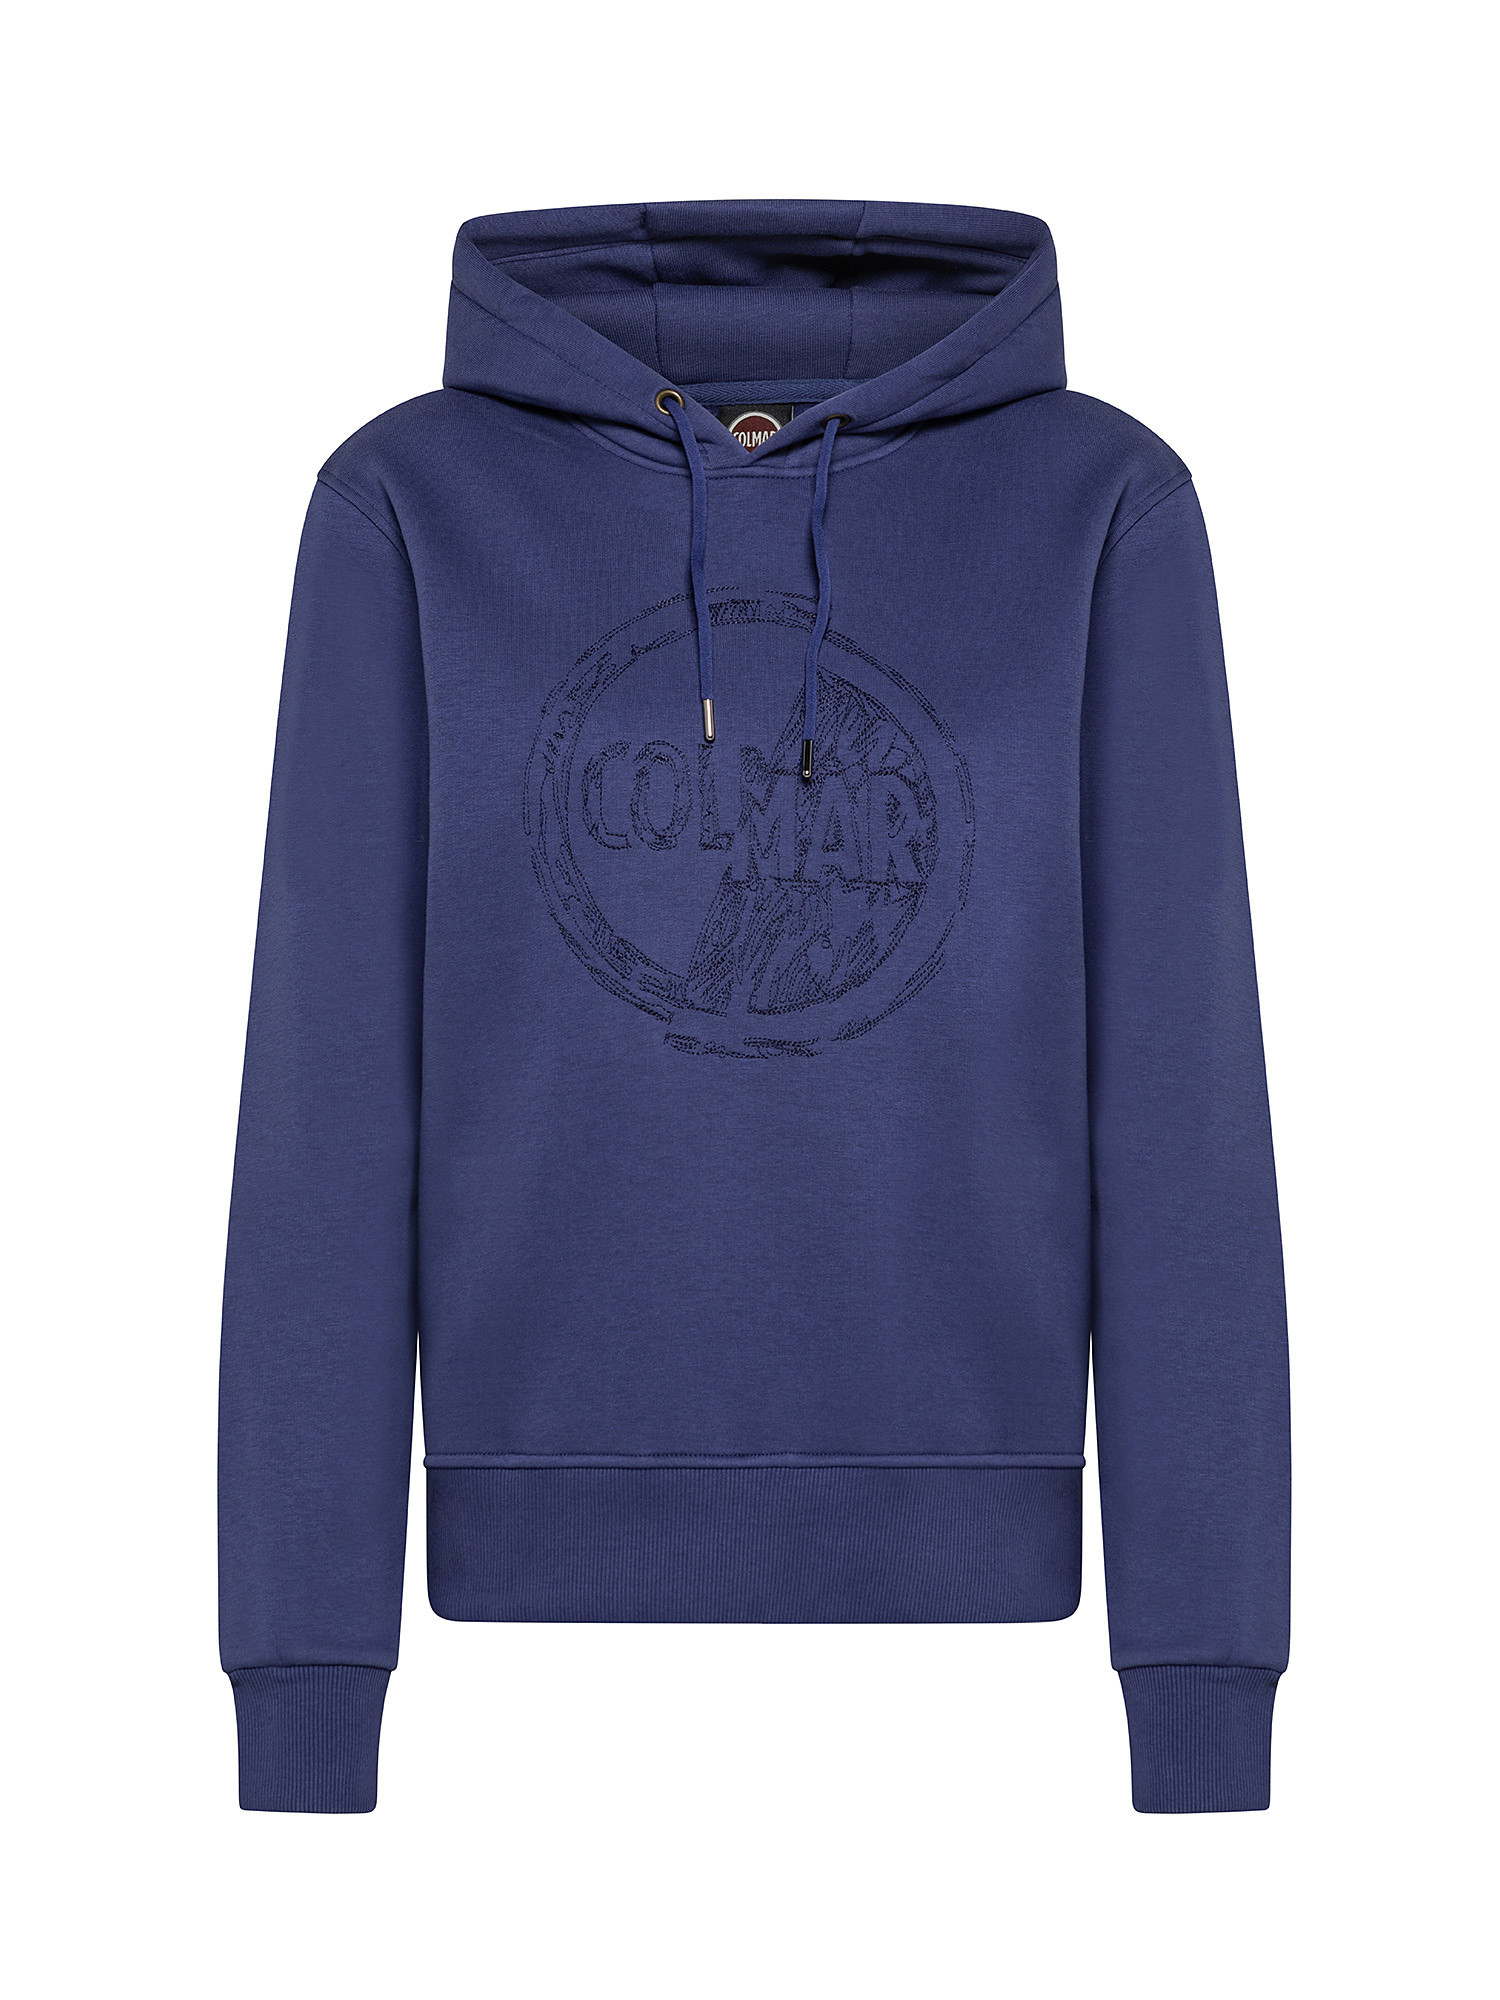 Hoodie sweatshirt with embroidery on chest, Blue, large image number 0